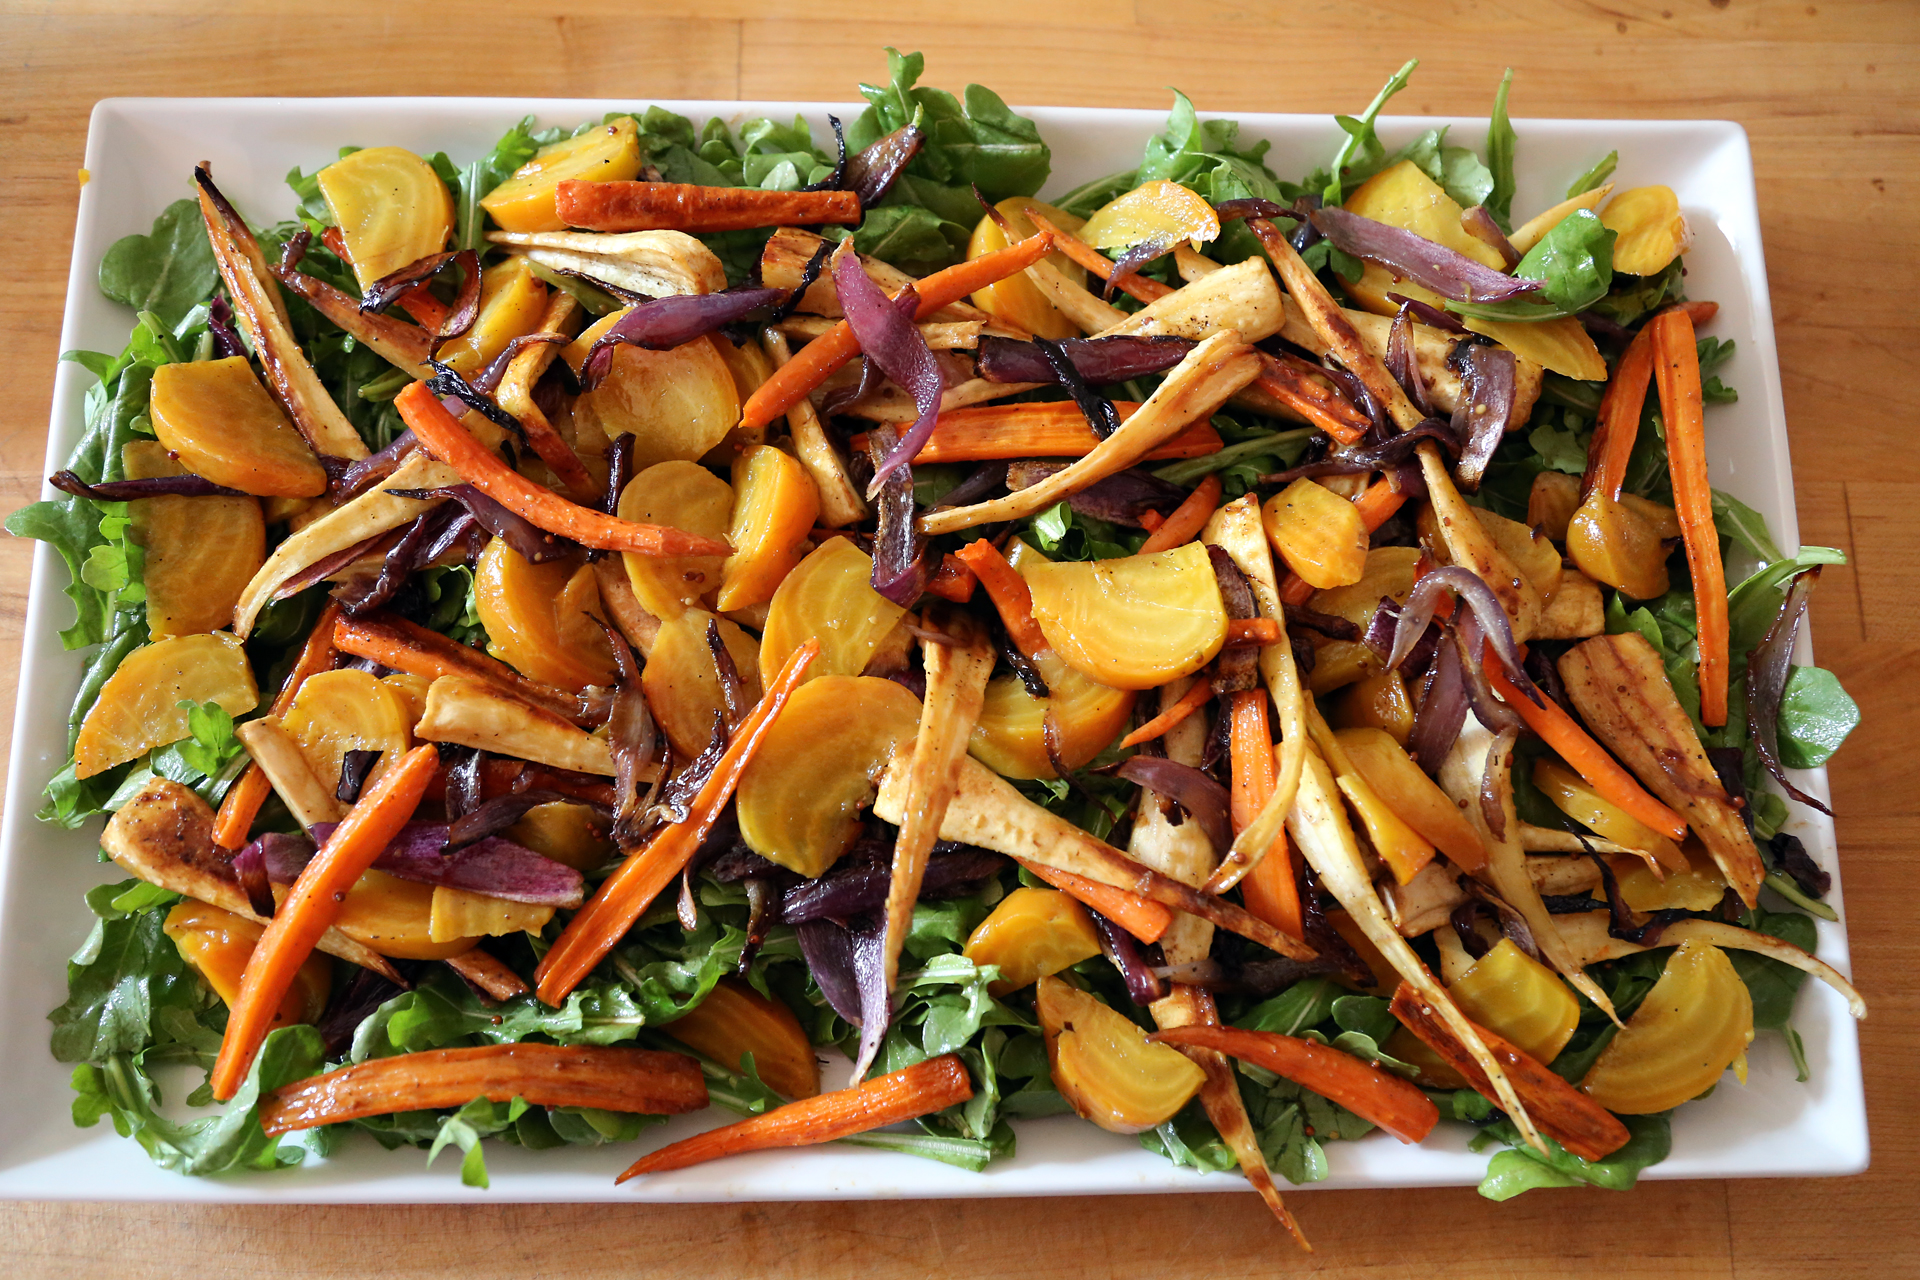 Top the arugula with the roasted vegetables.